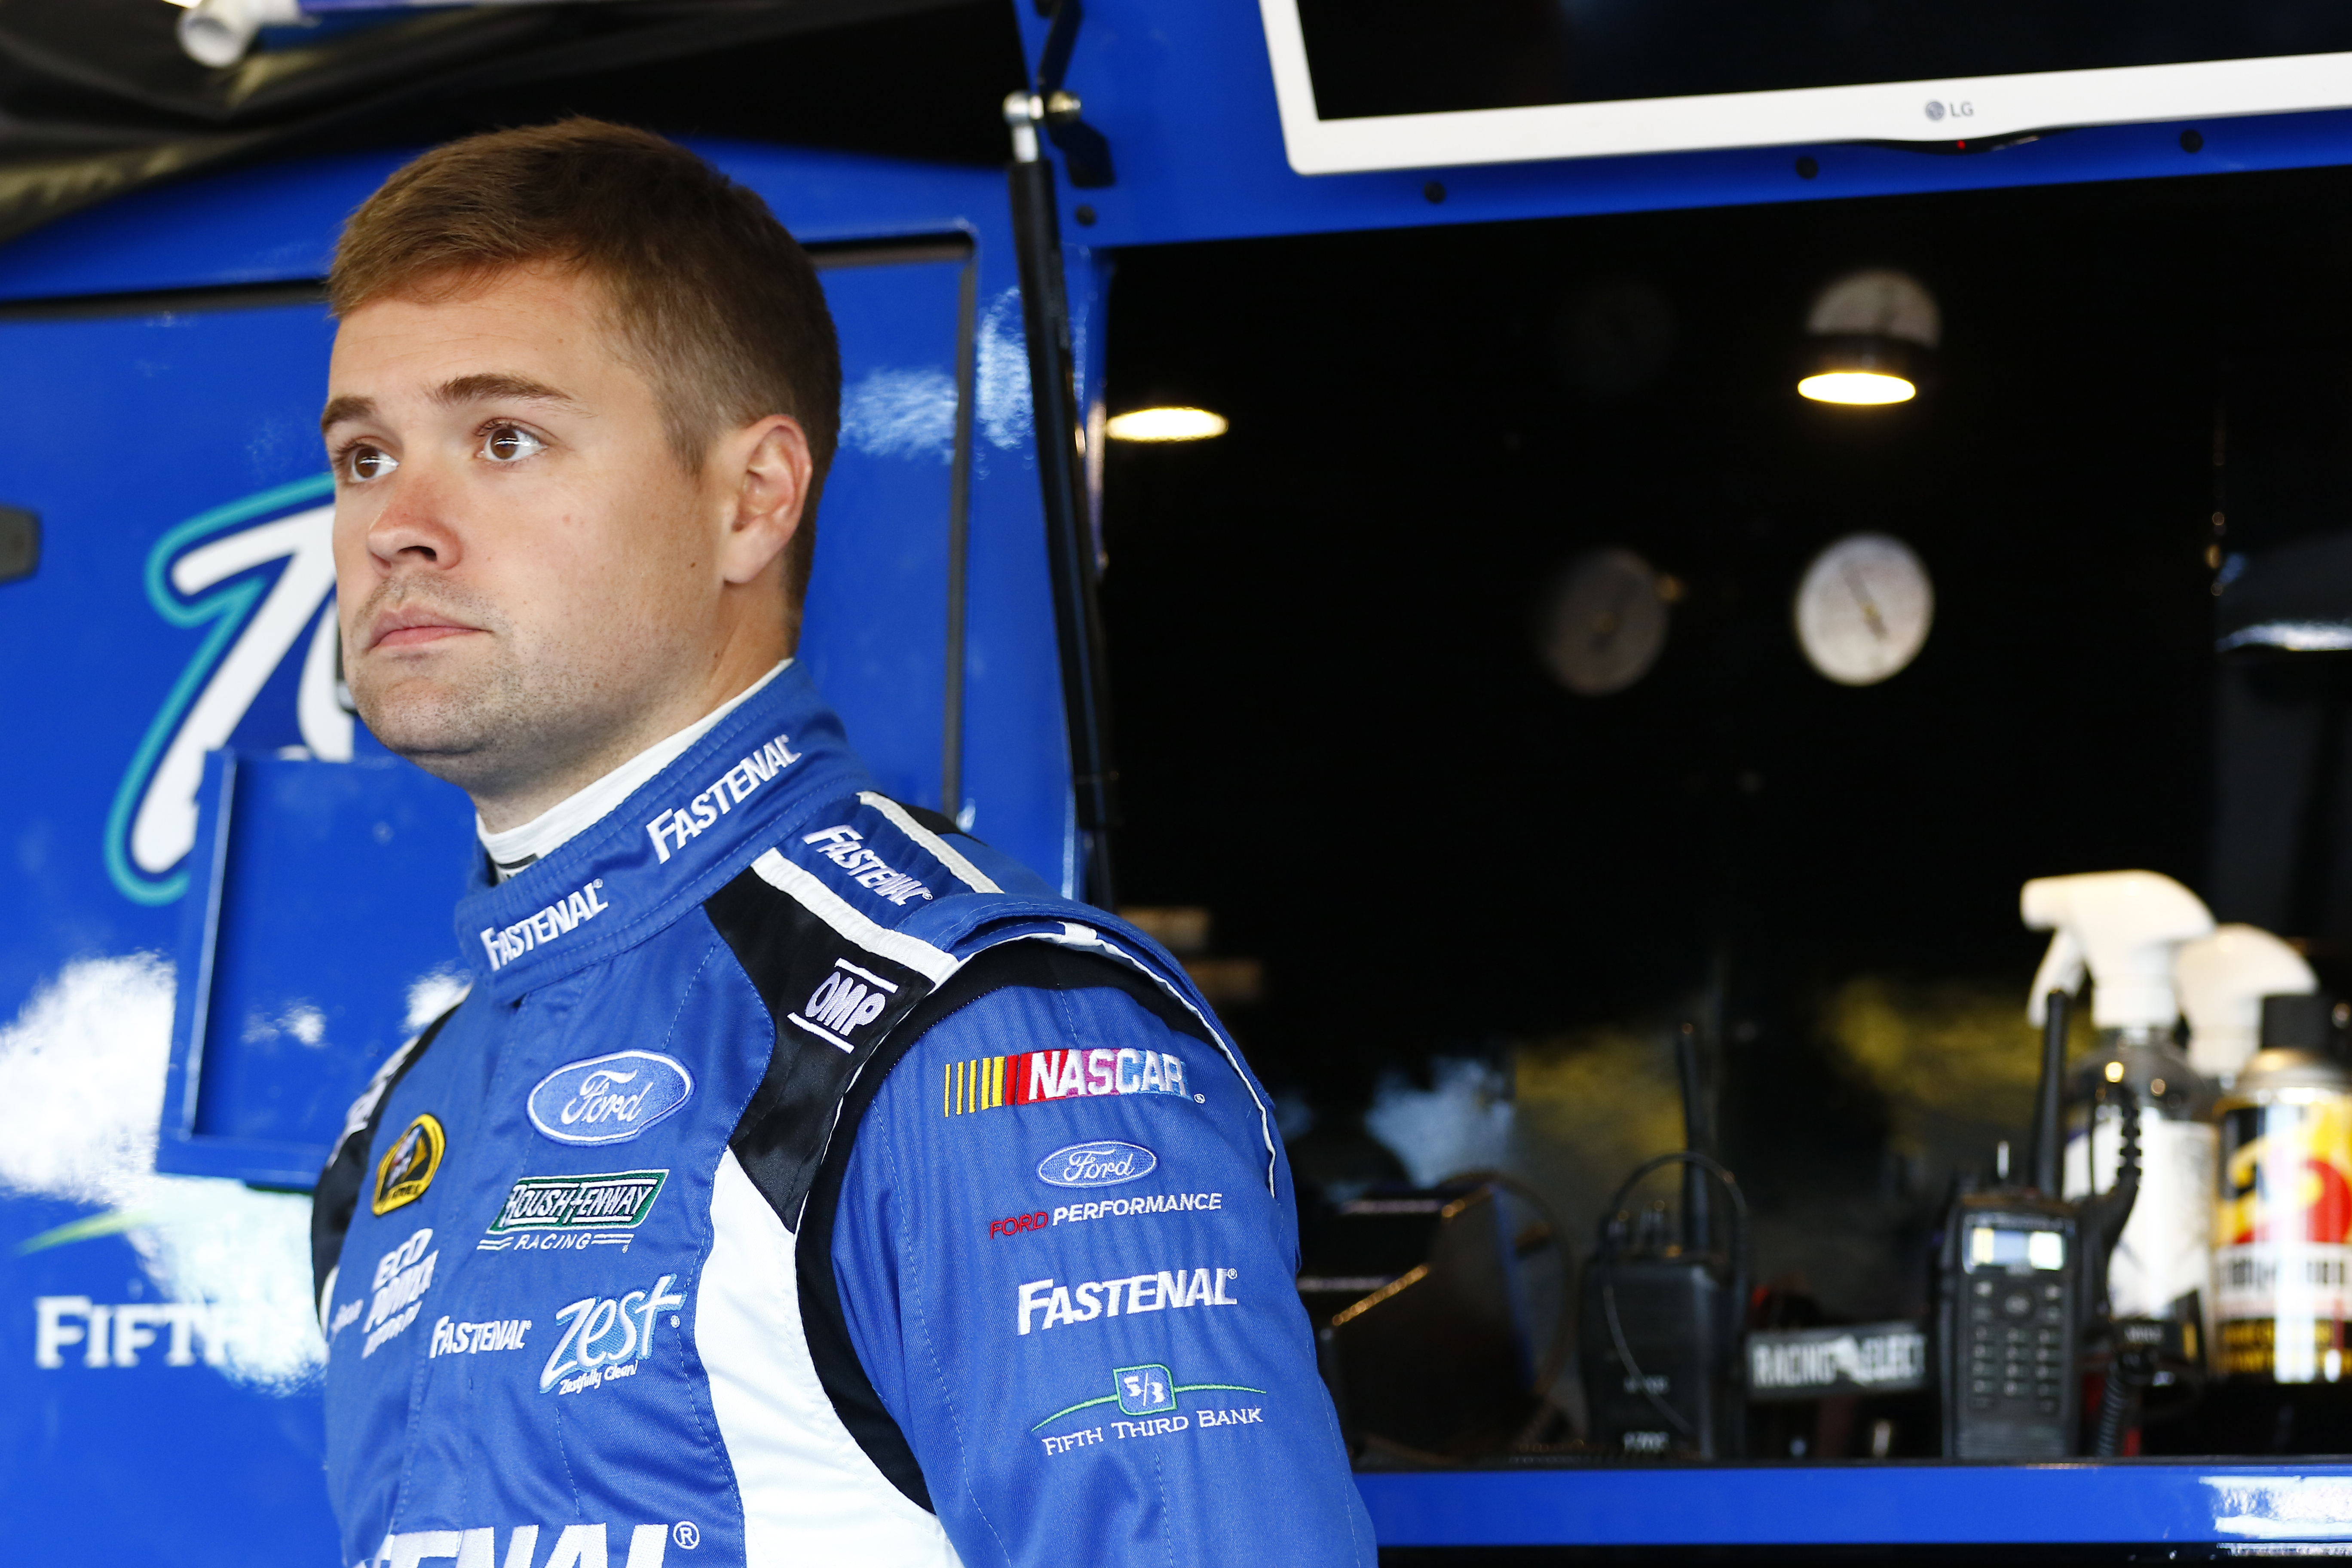 Stenhouse Jr. Finishes 37th After a Tire Issue